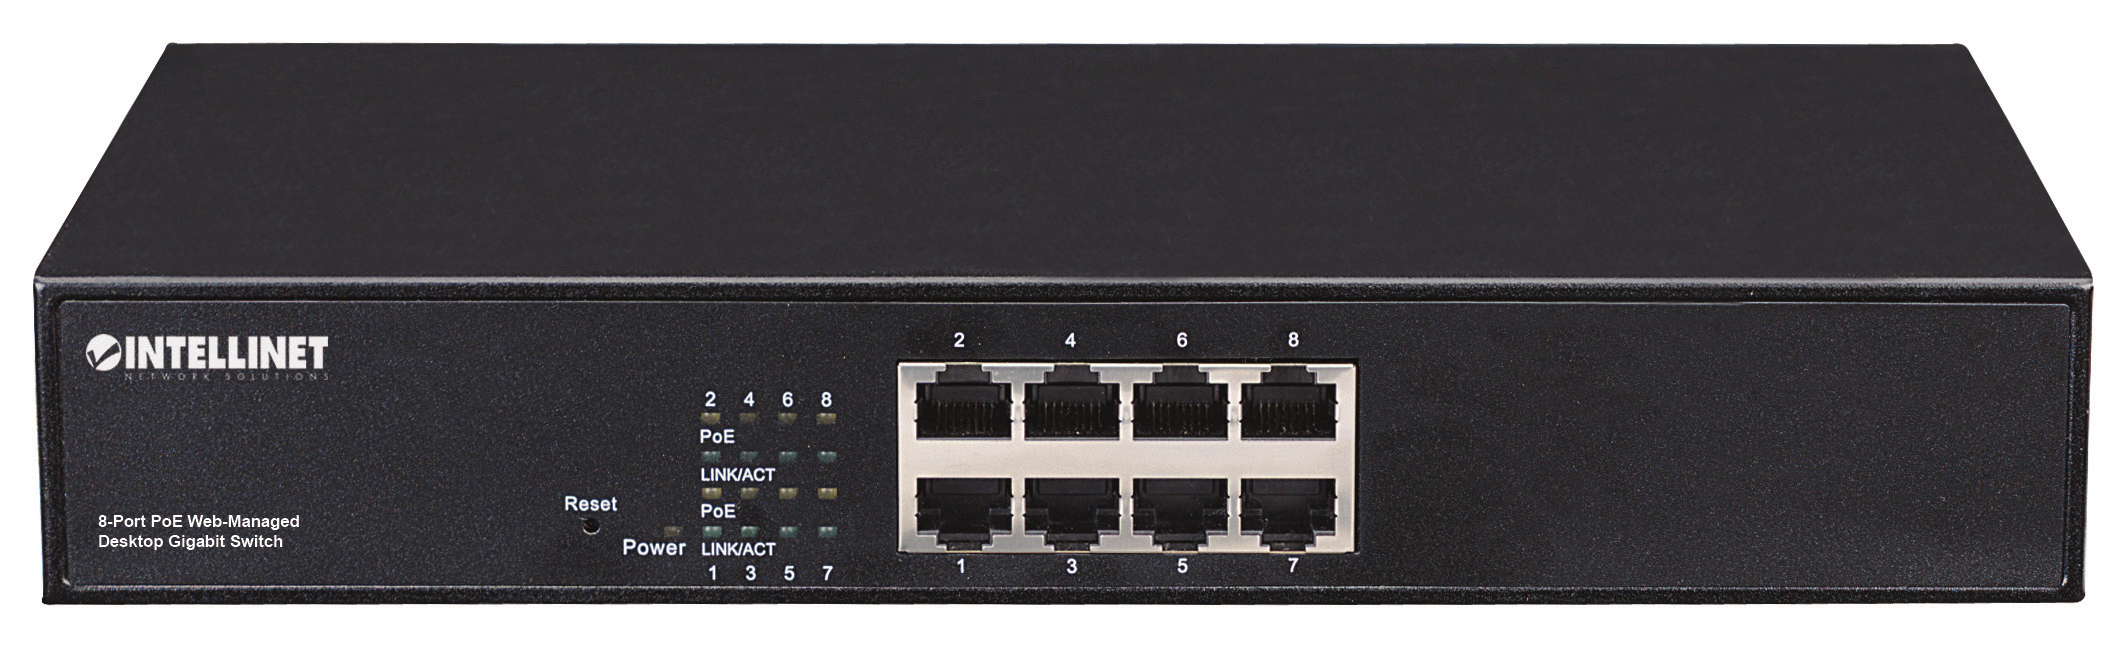 PoE Web-Managed Desktop Gigabit Switch English For specifications and detailed instructions, refer to the user manual on the enclosed CD or at intellinet-network.com.